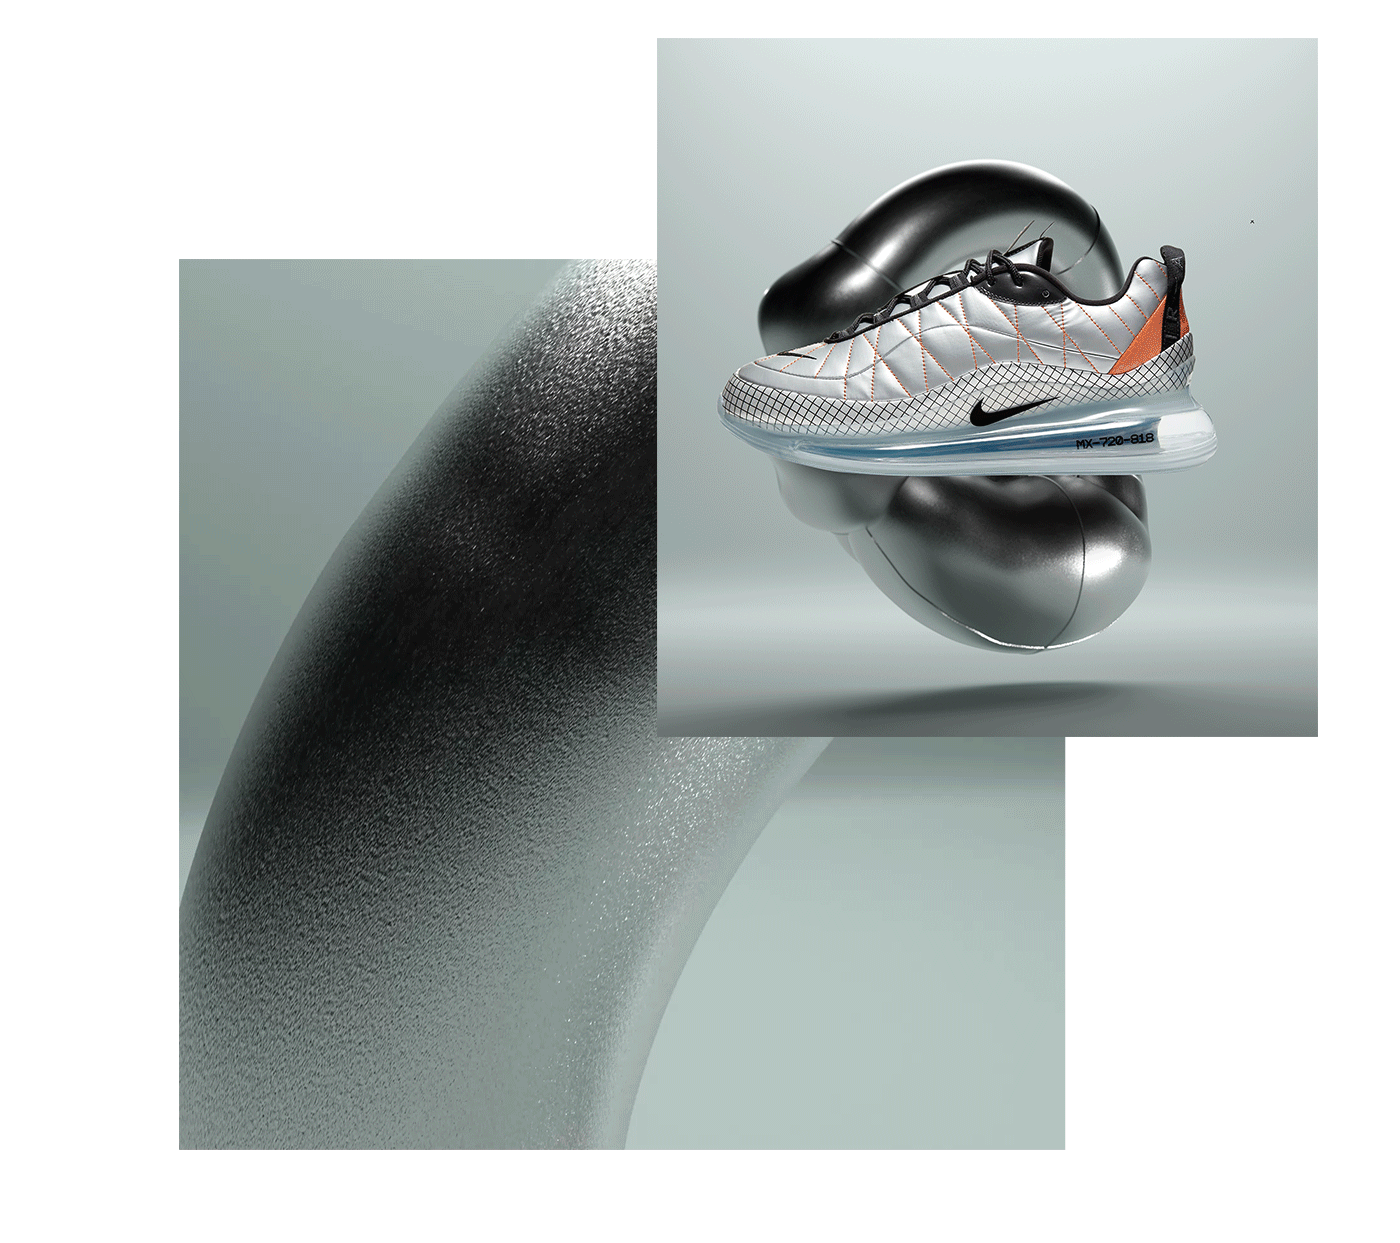 Sneakers Compilation on Behance6f81c891627885.5e37193bd79b1.gif